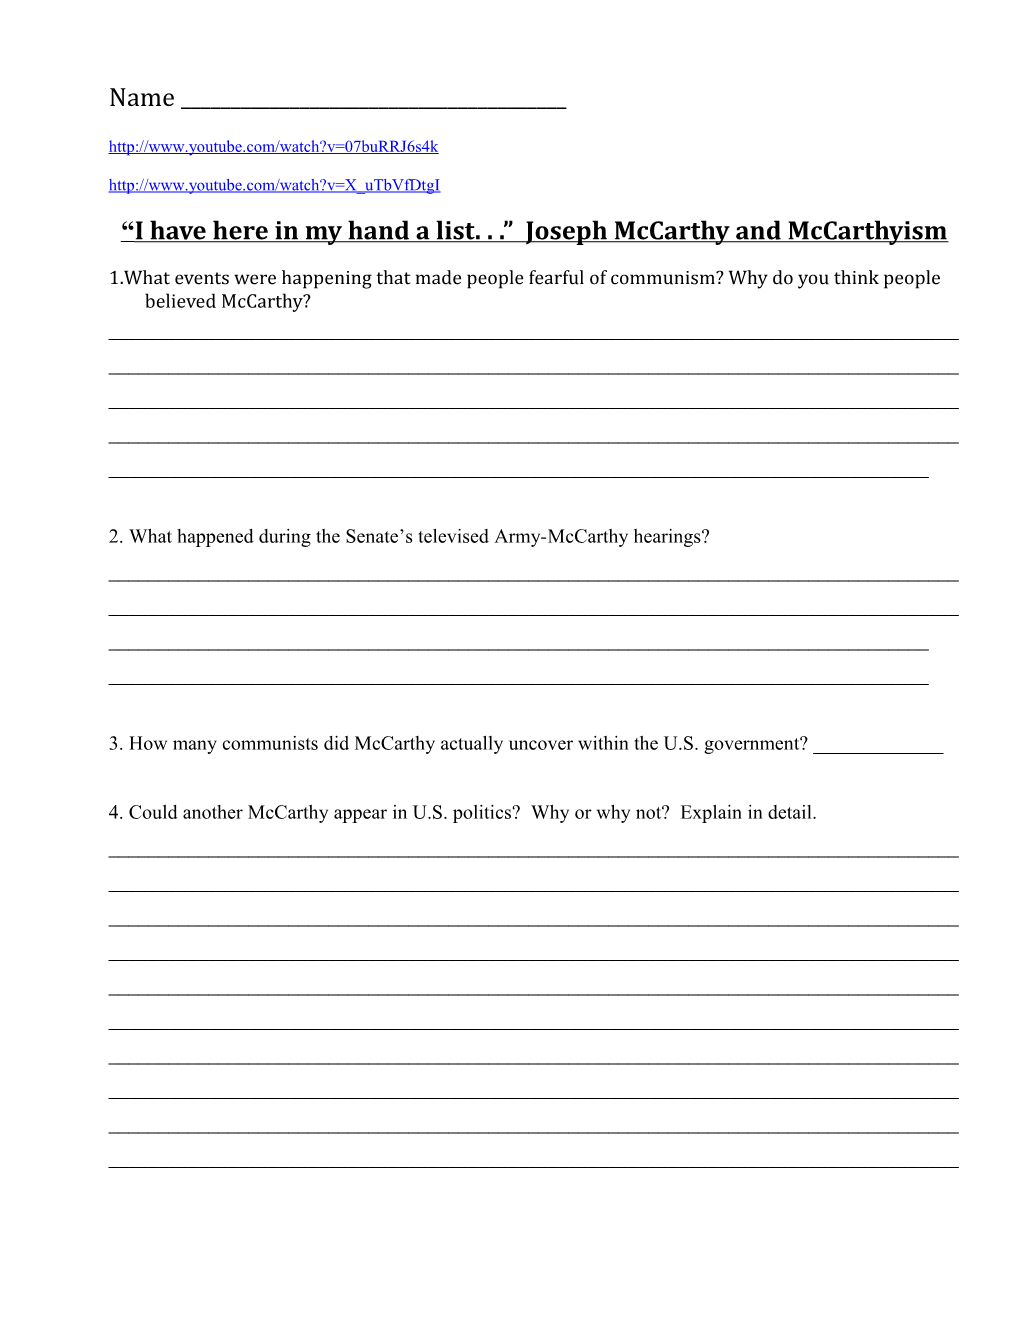 I Have Here in My Hand a List. . . Joseph Mccarthy and Mccarthyism